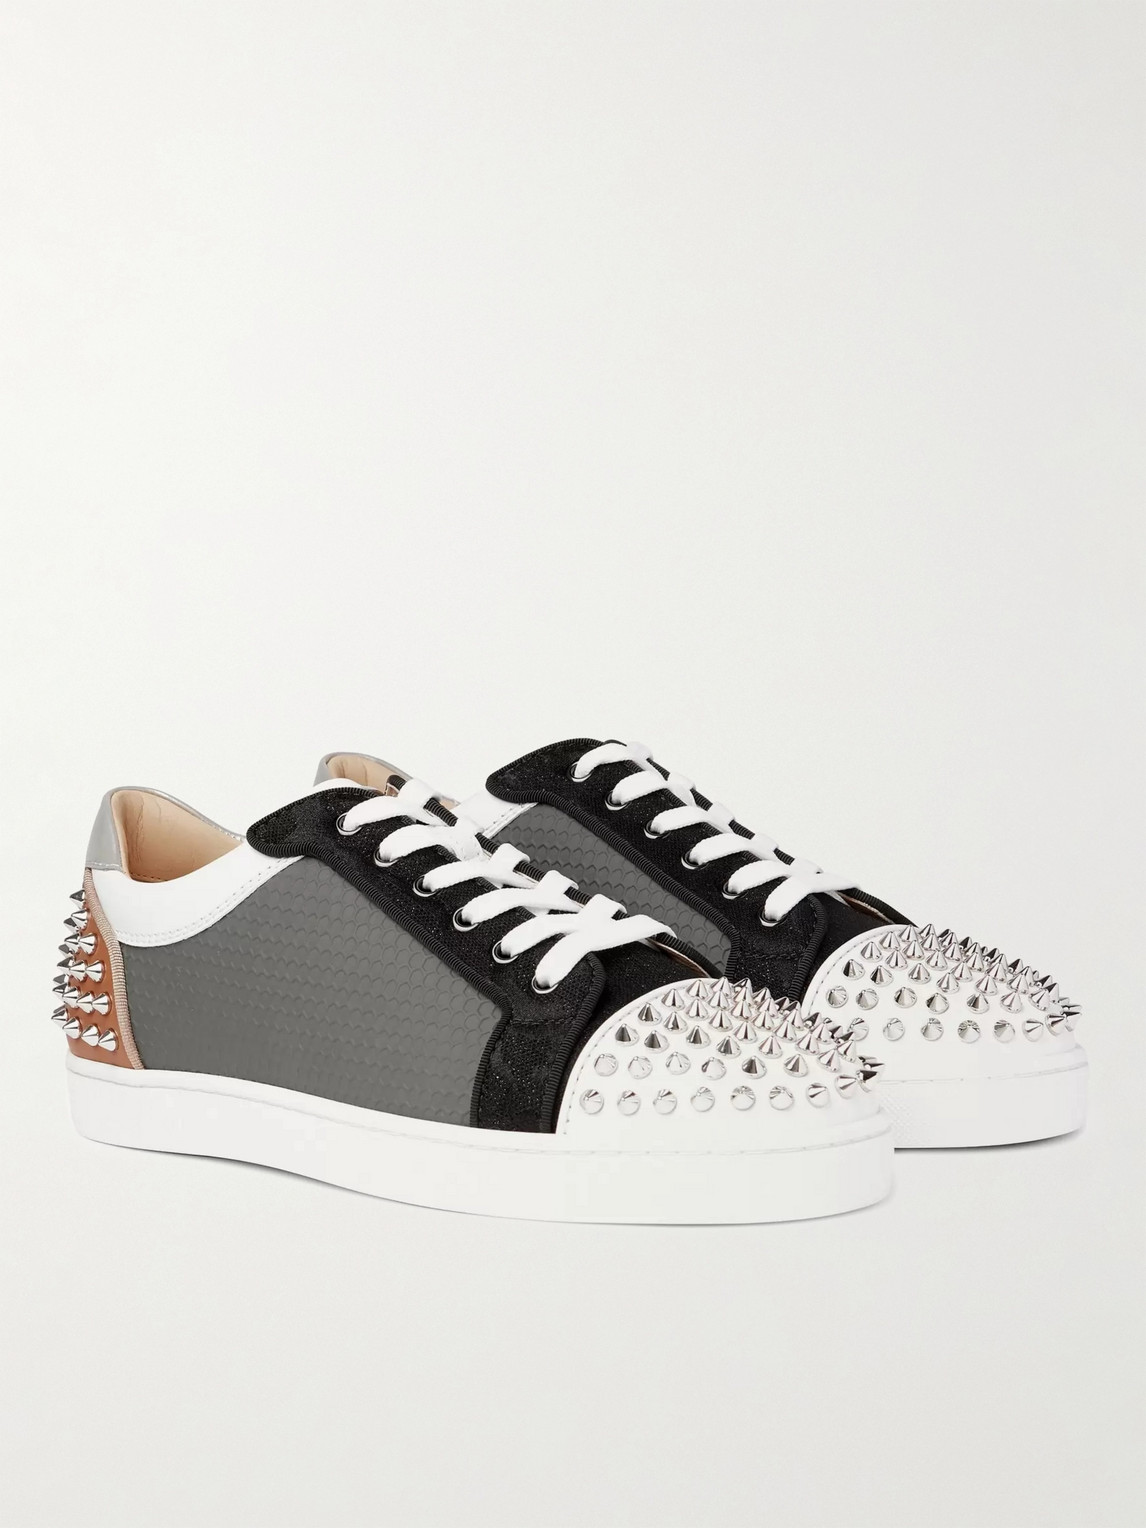 Christian Louboutin Sevaste Spiked Leather, Honeycomb Canvas And Mesh Trainers In Multi